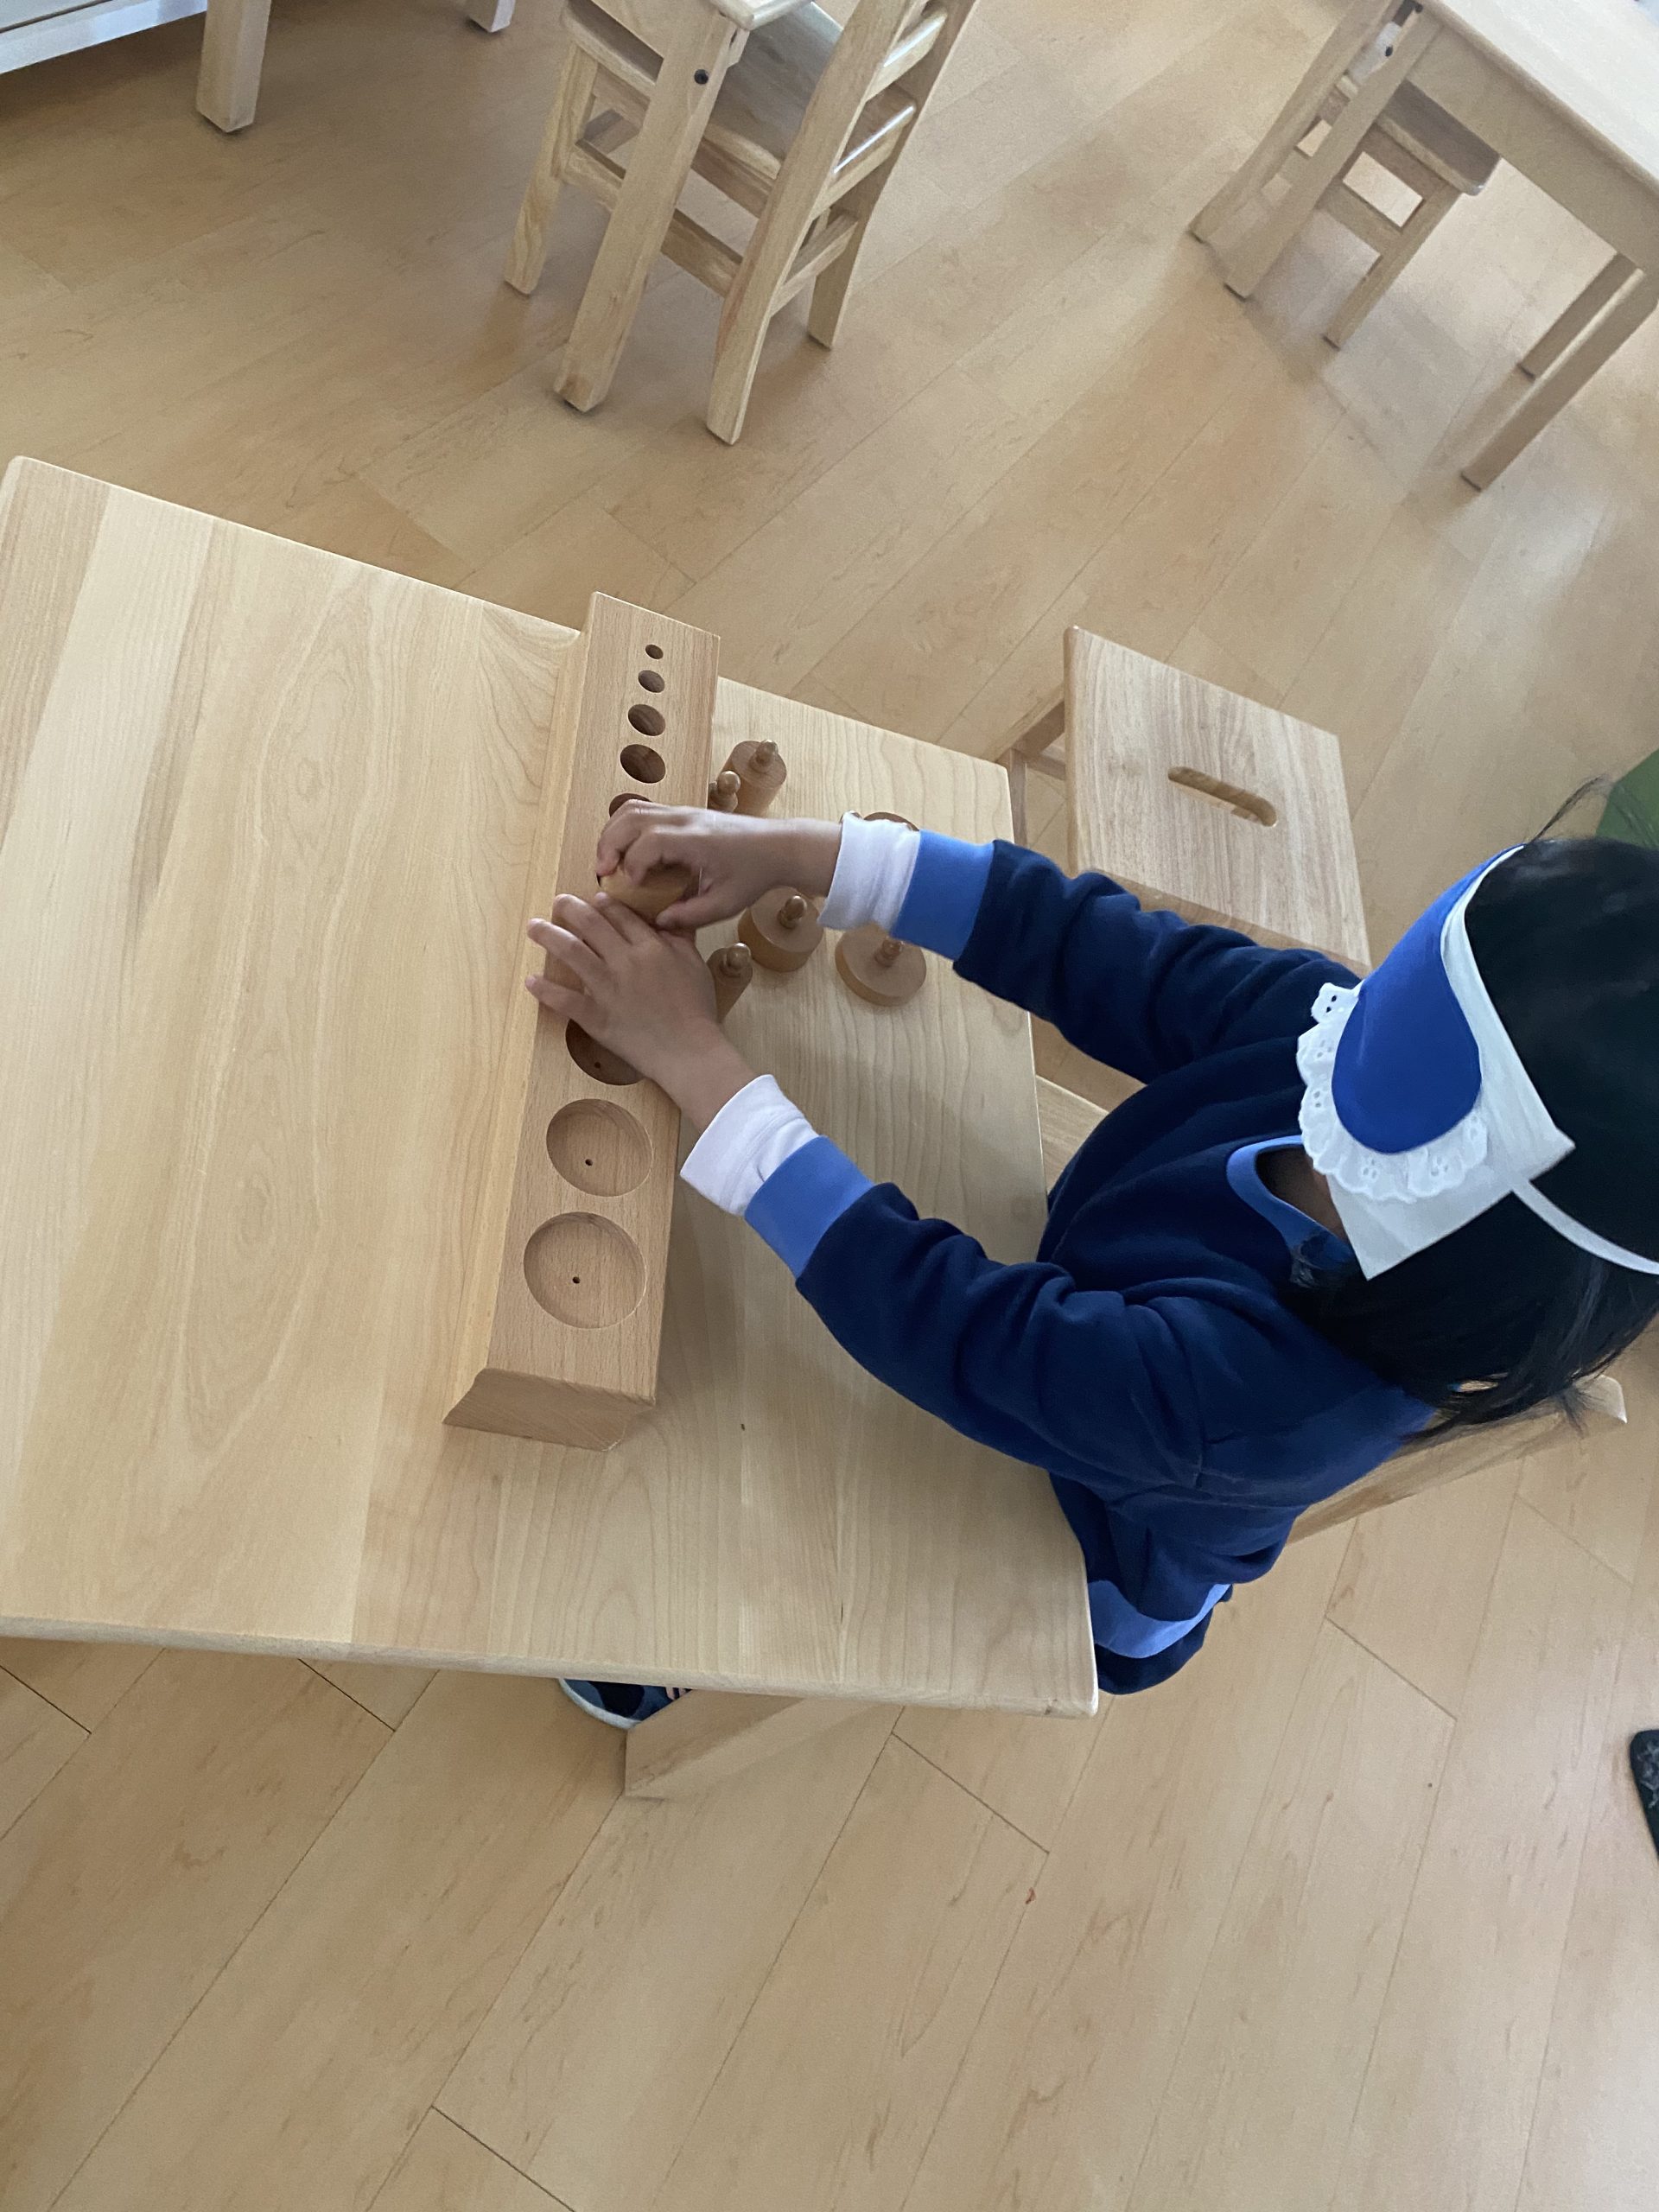 Primary student blindfolded while solving puzzles